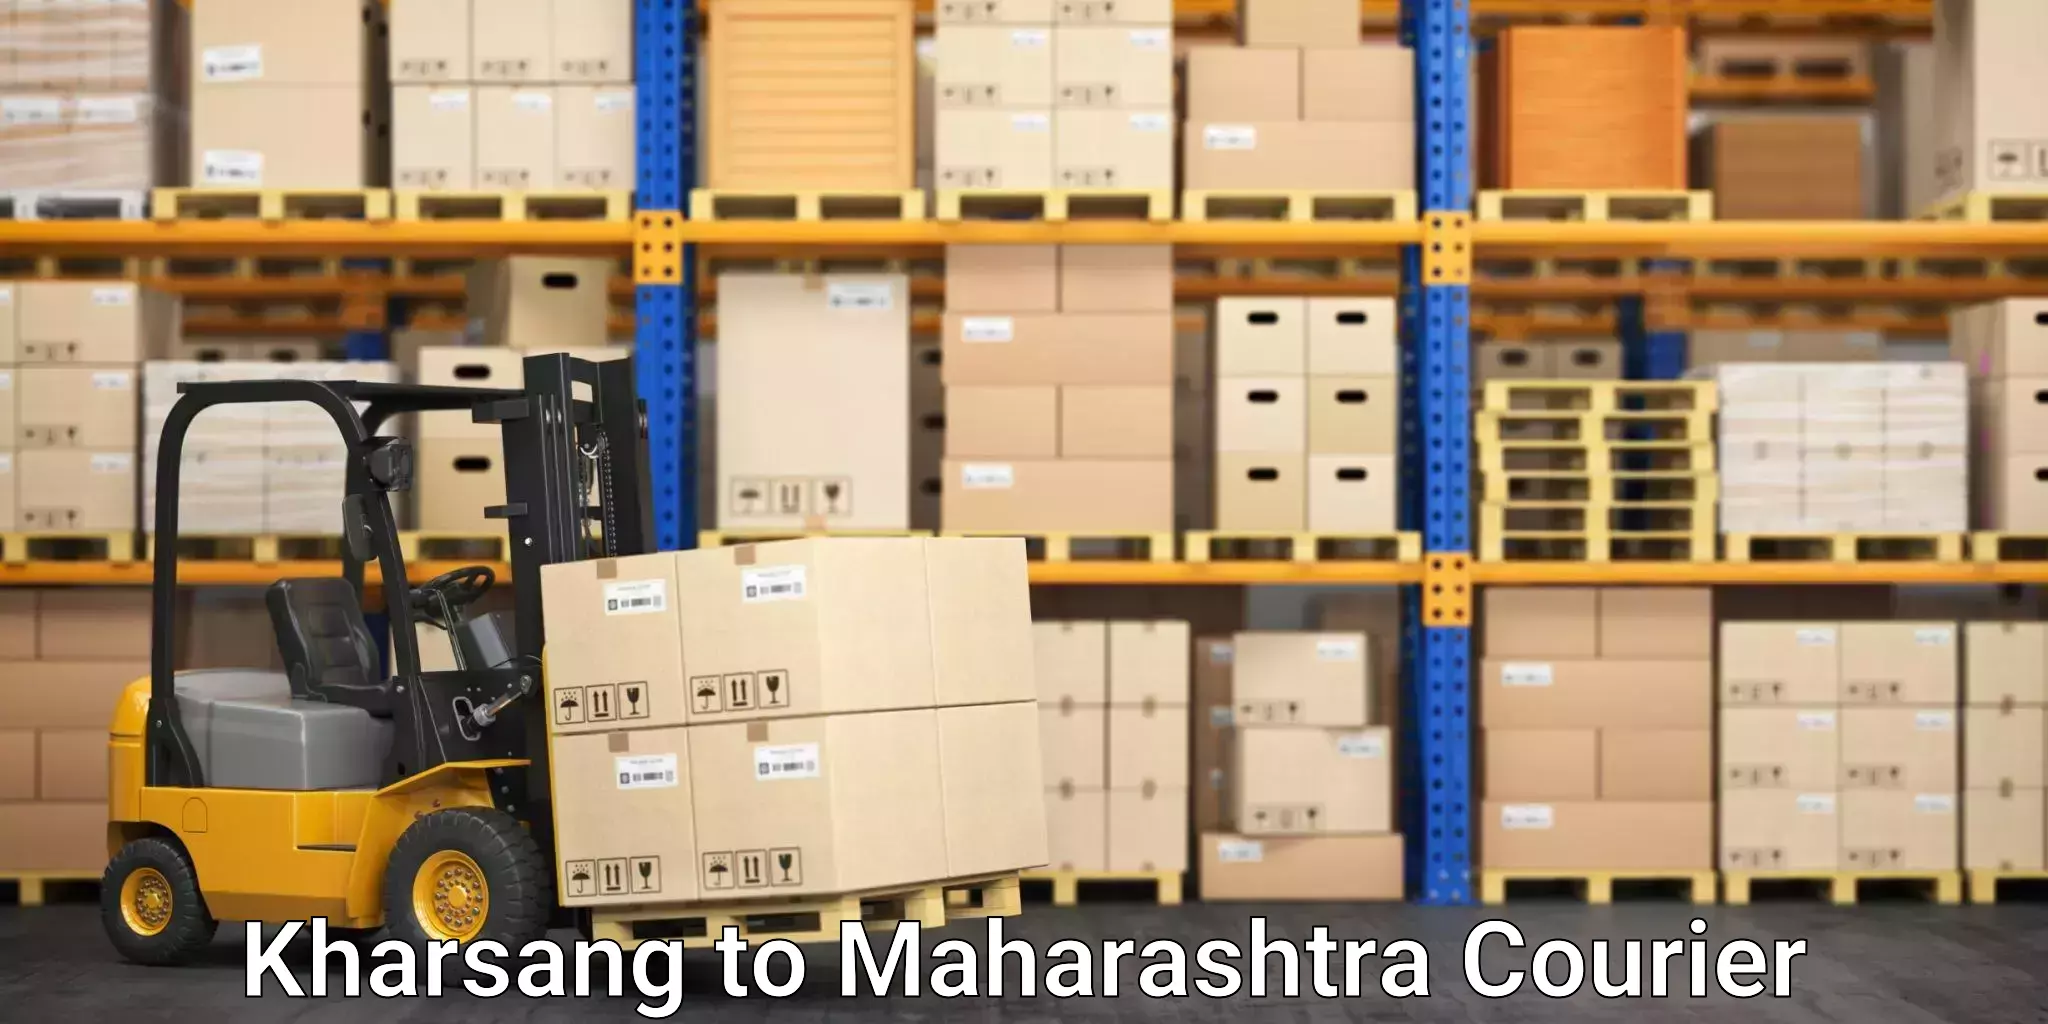 Customized shipping options in Kharsang to Institute of Chemical Technology Mumbai